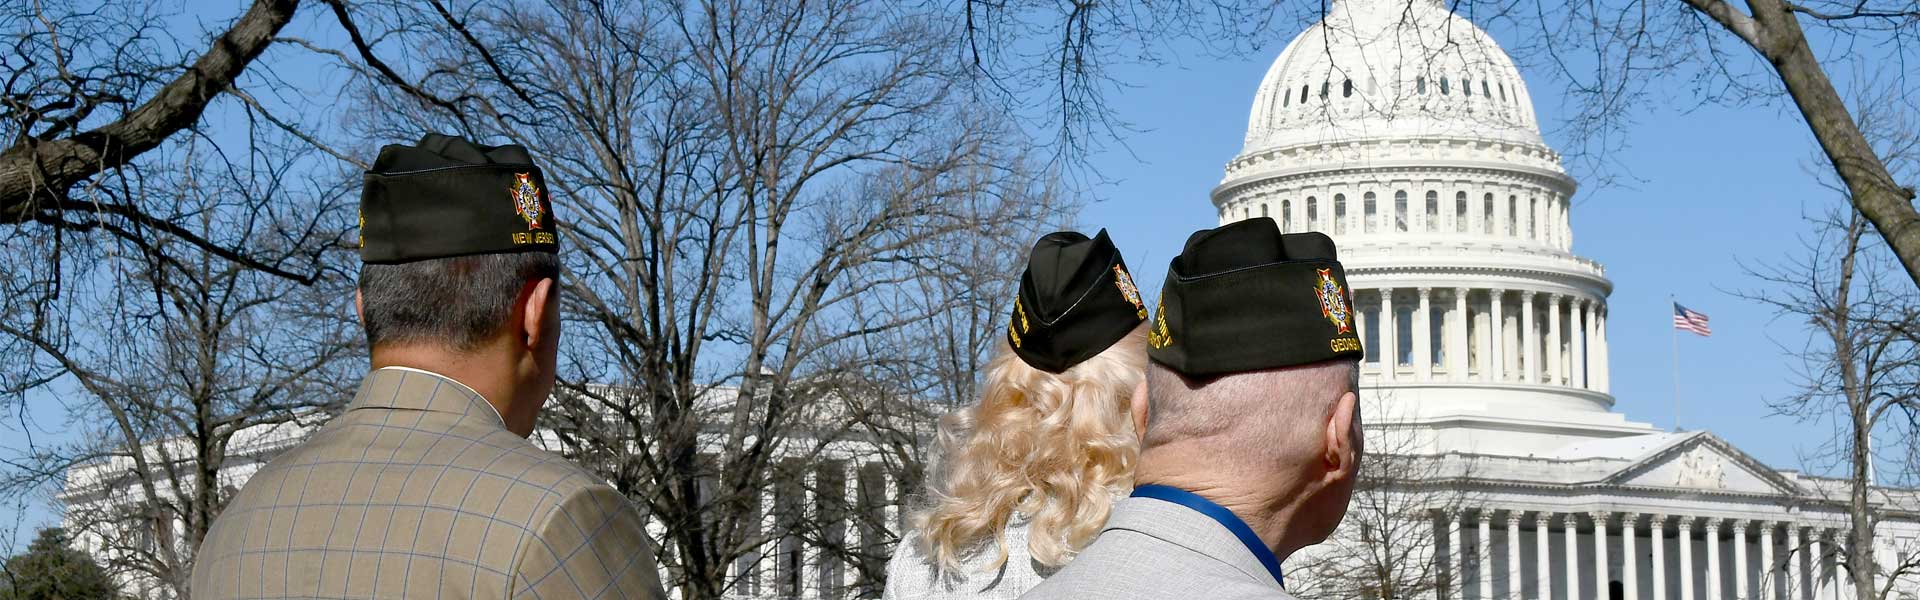 VFW leadership looking at Capitol Hill Congressional building